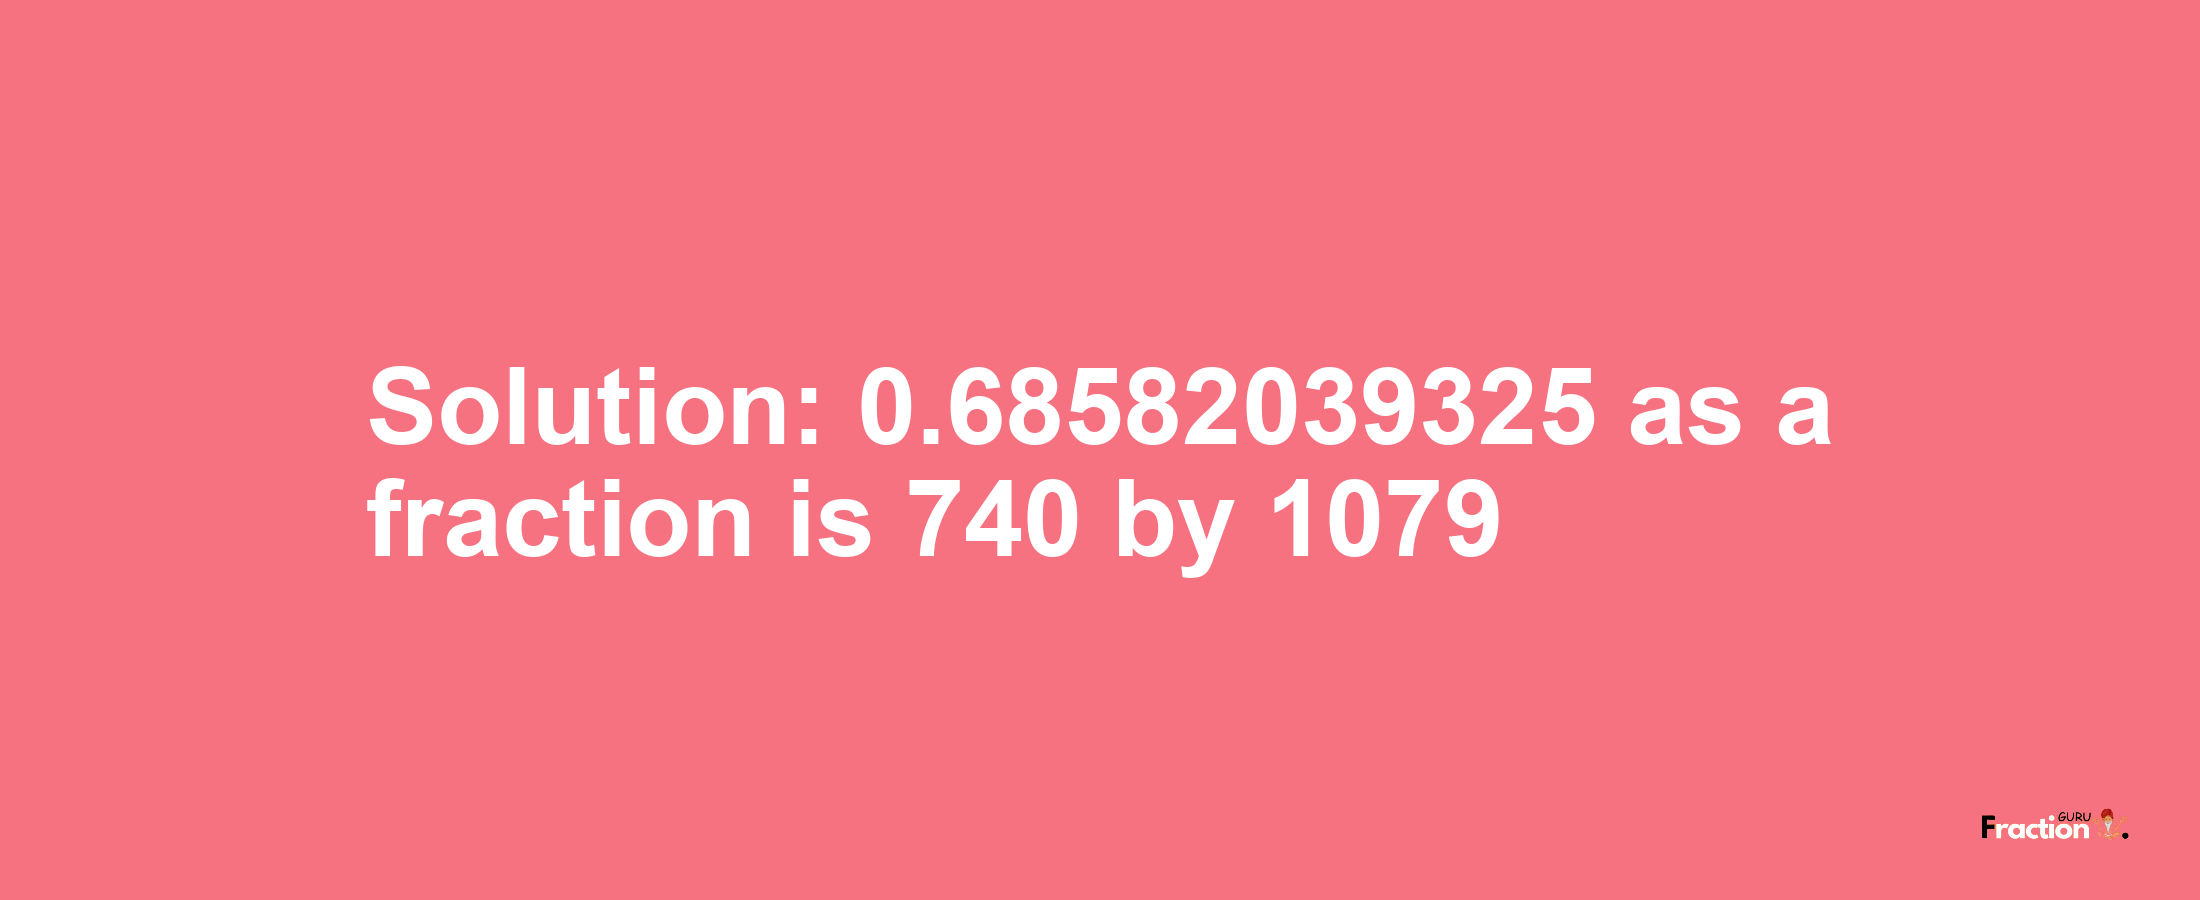 Solution:0.68582039325 as a fraction is 740/1079